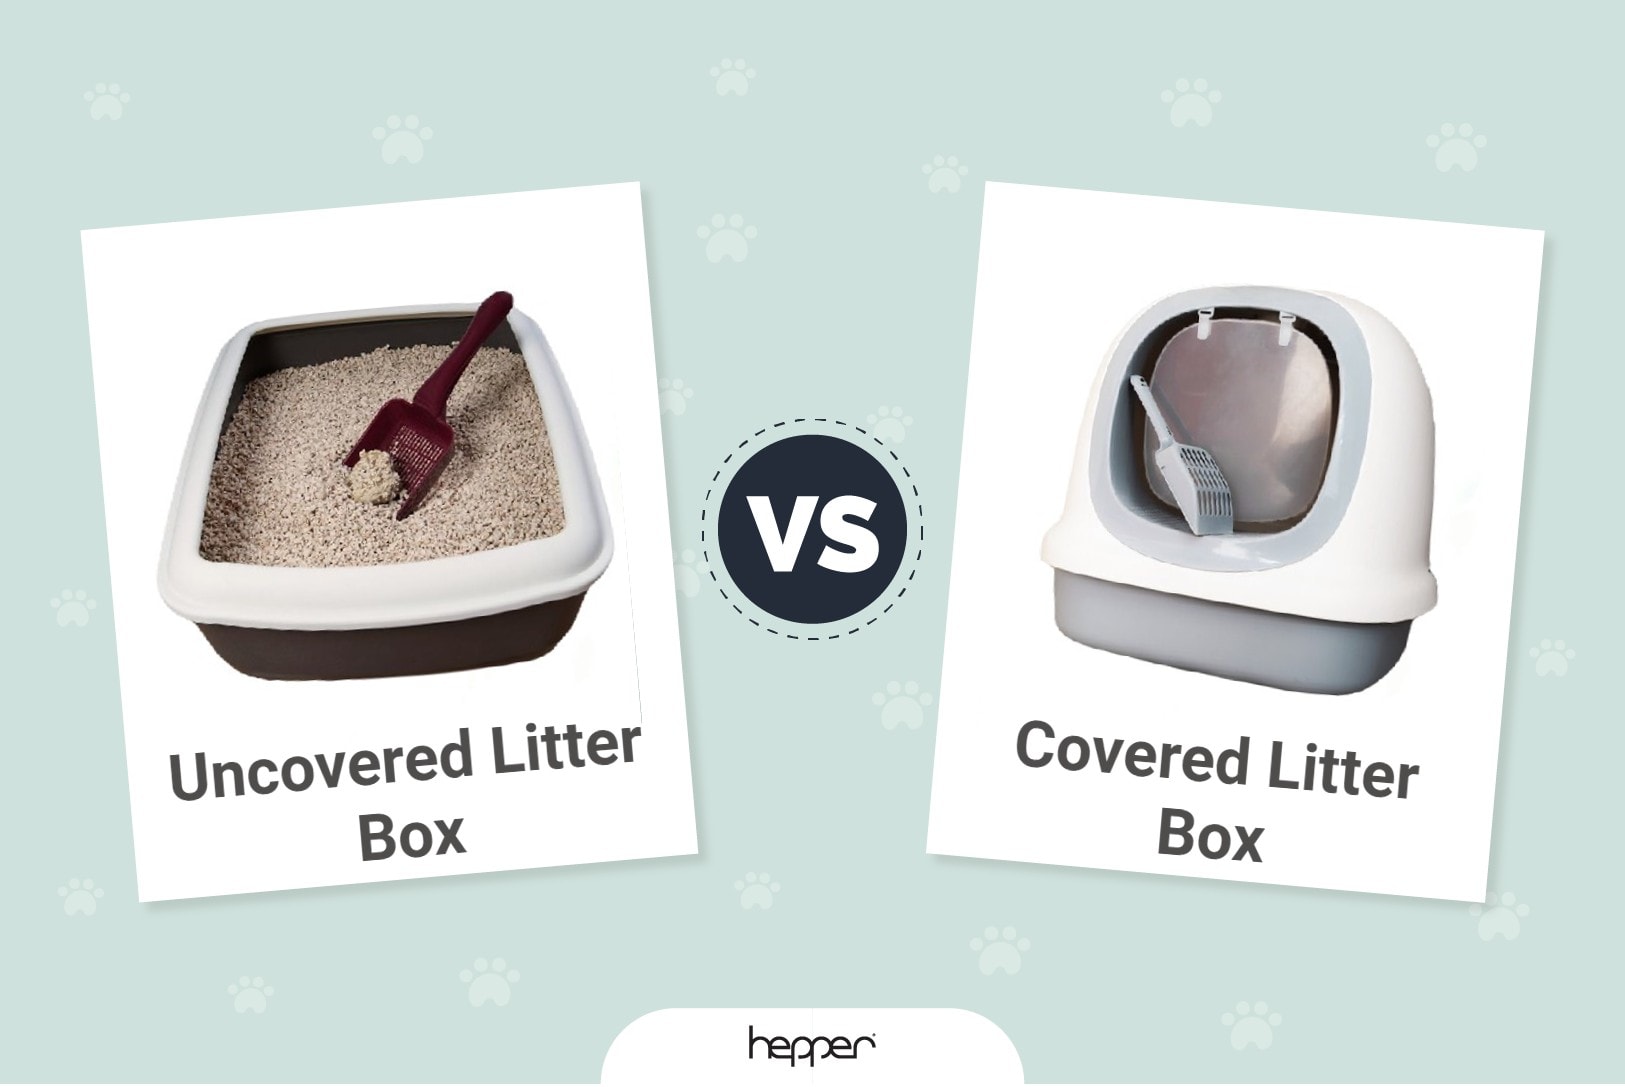 Covered vs Uncovered litter box